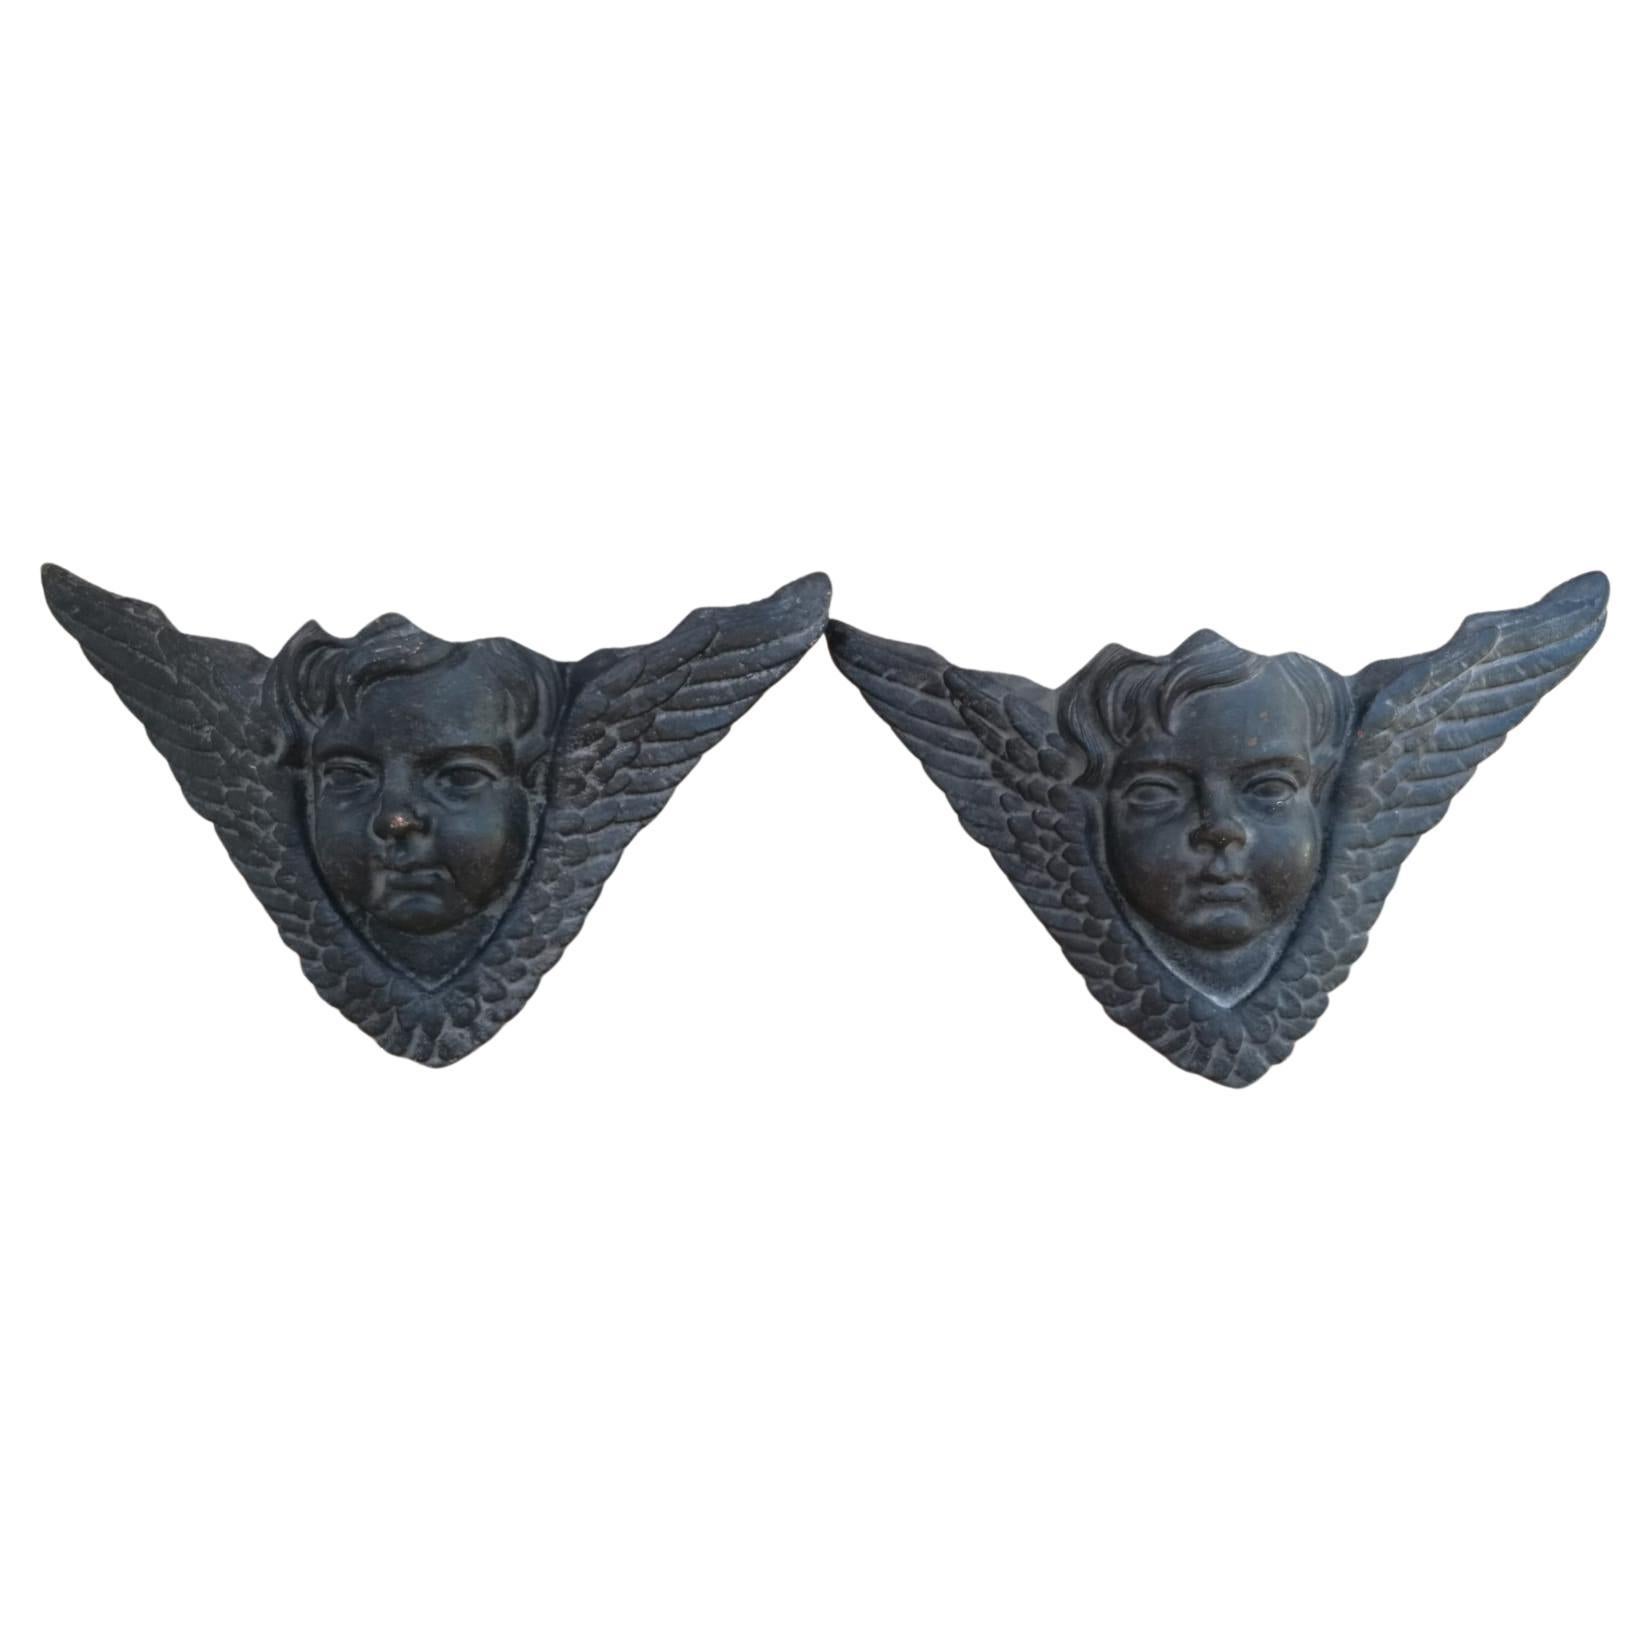 Beautiful pair of winged angel sconces made of cast iron from an old castle where they were embedded in the wall and behind them a point of light was placed as a really incredible sconce, although only as decoration they are already spectacular